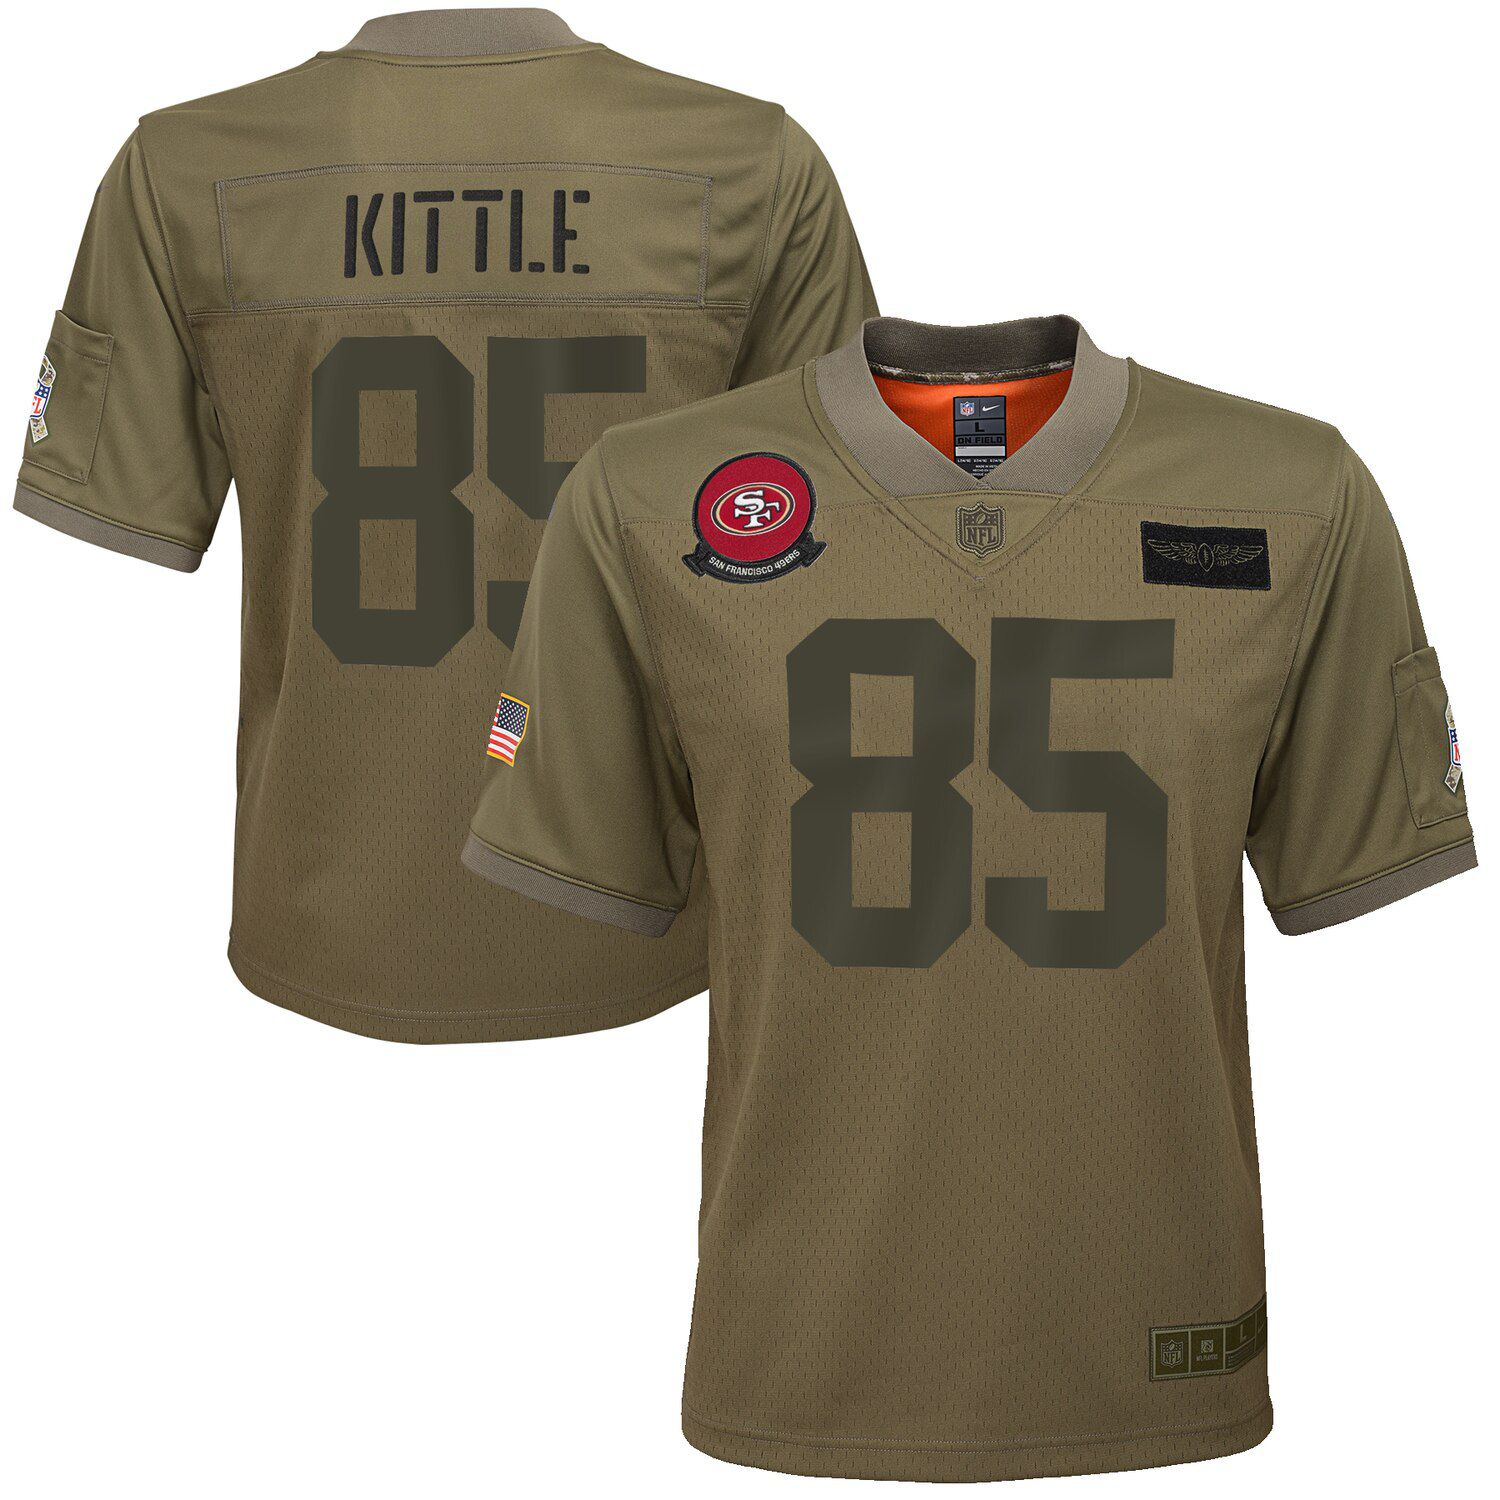 george kittle military jersey